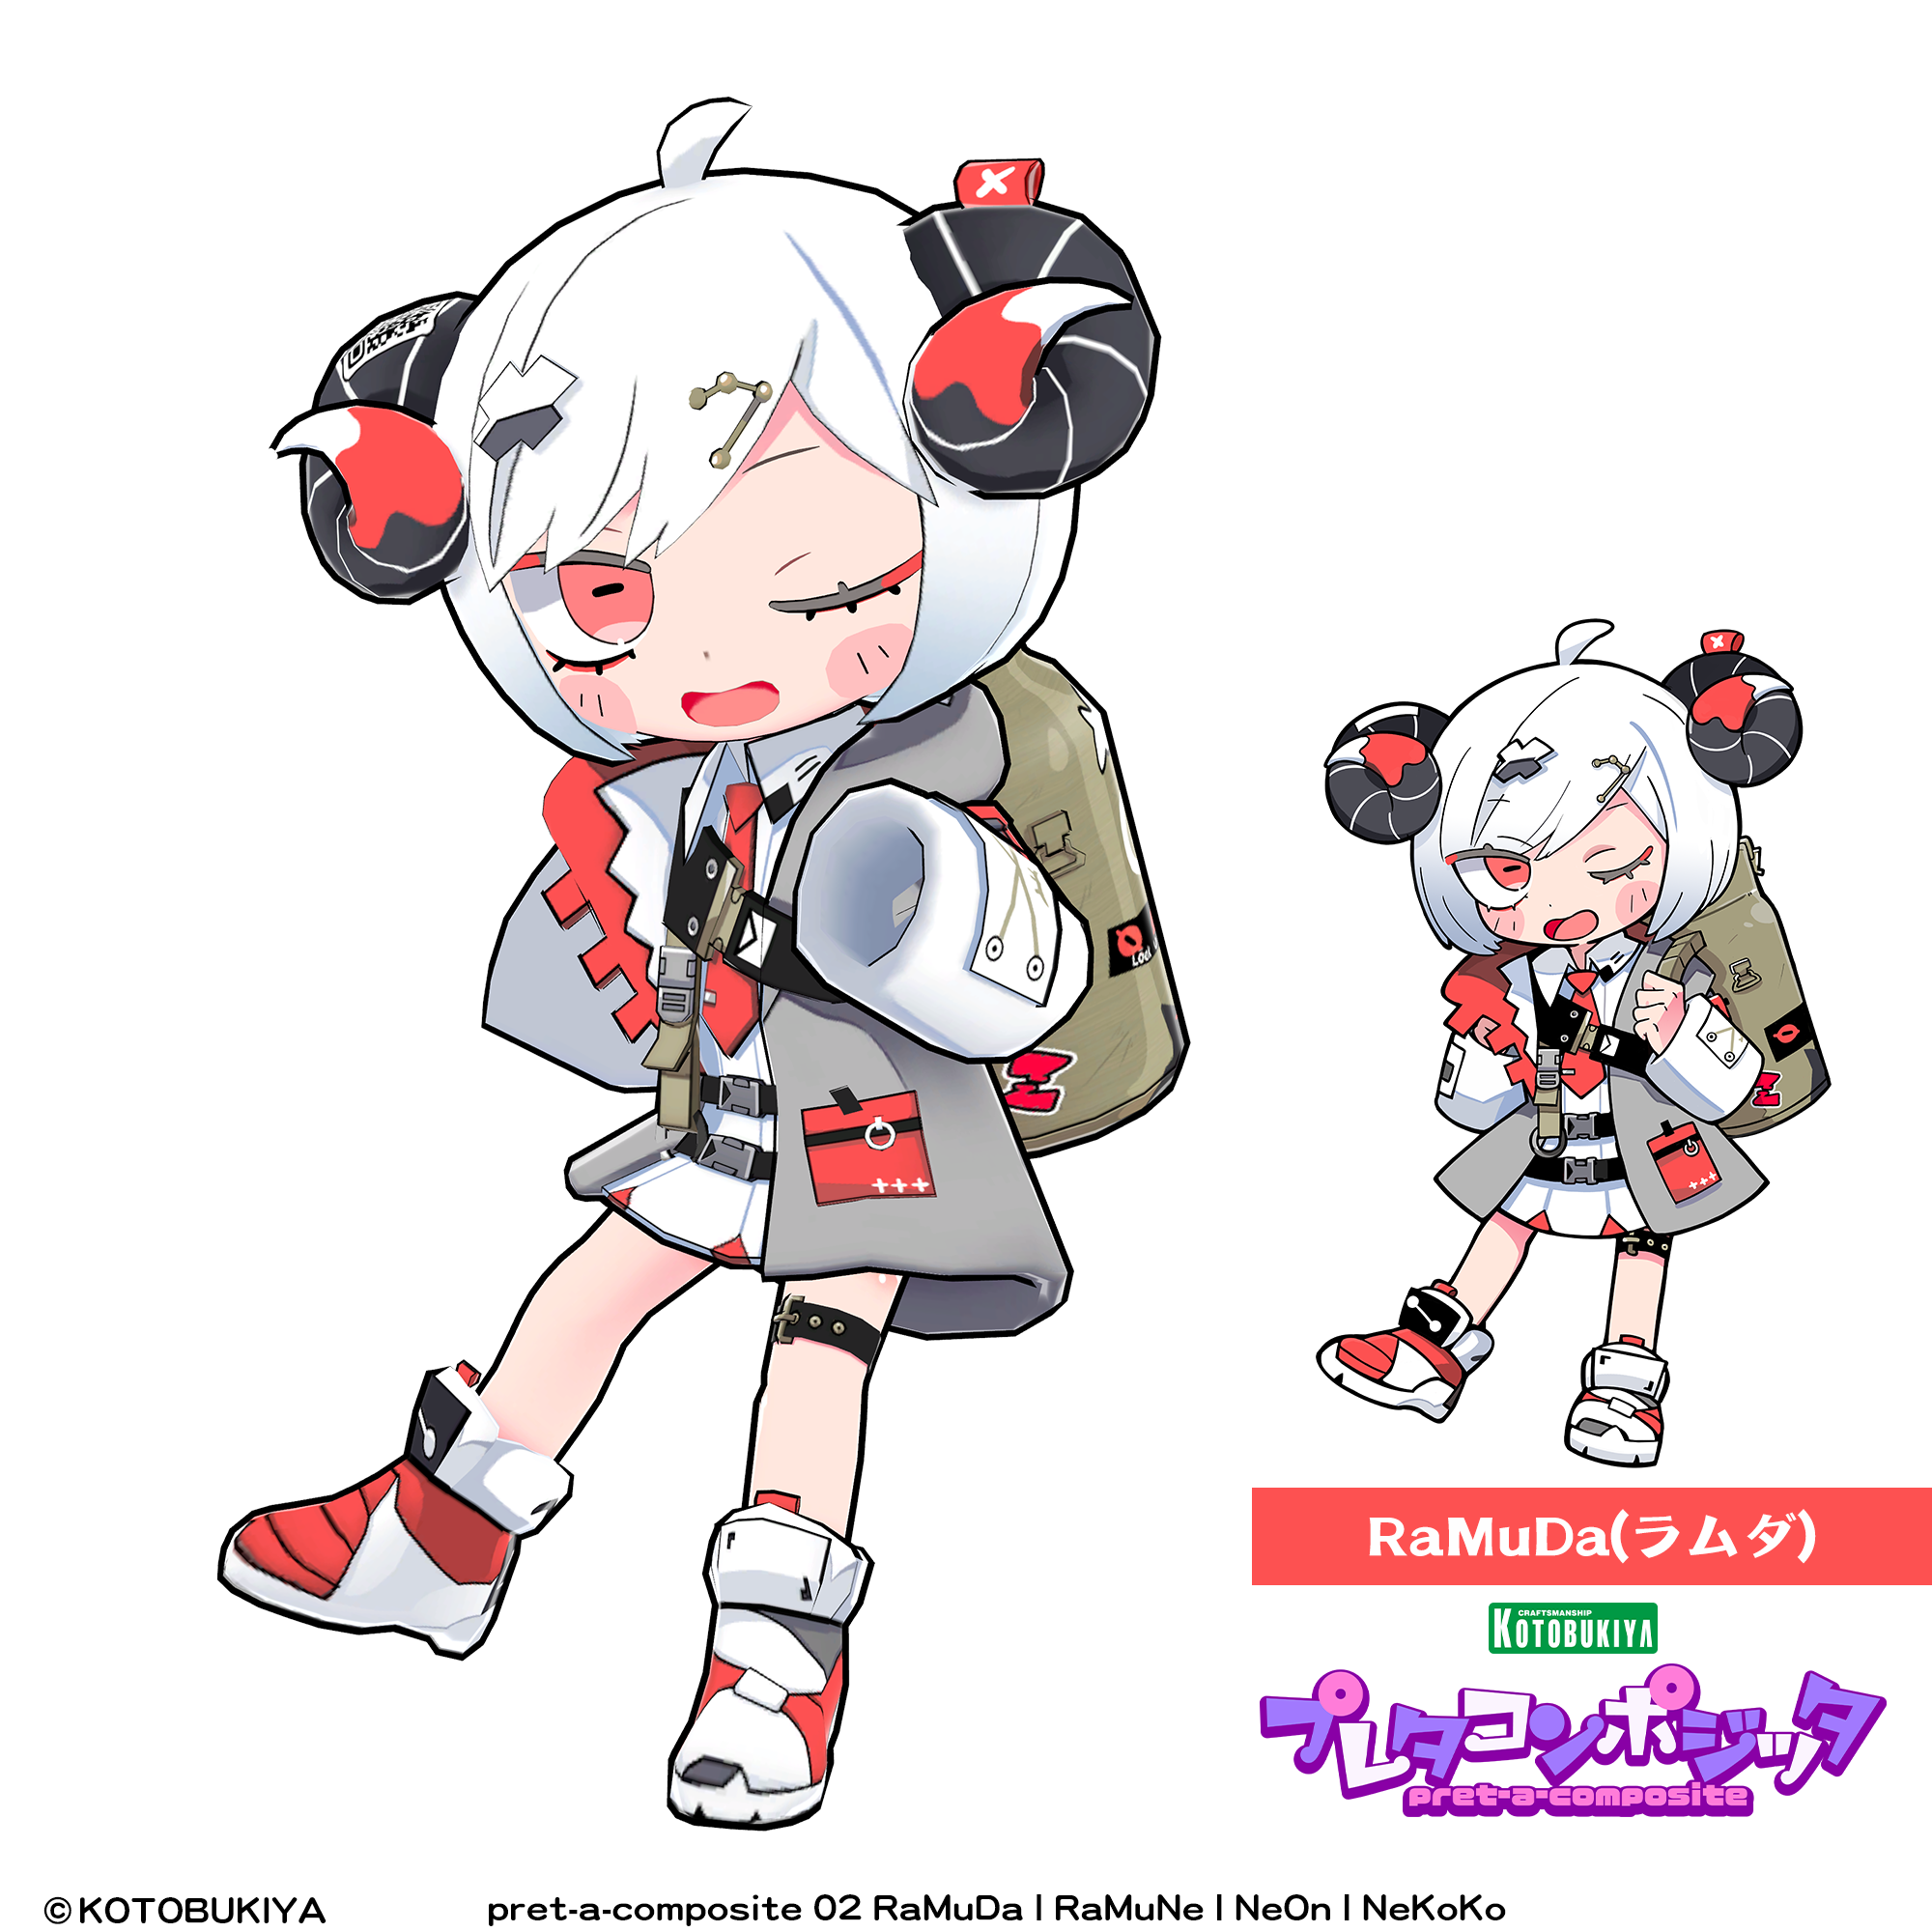 Image from avatarchan's booth listing of a 3D model called RaMuDa, a humanoid with ram horns and a grey coat, depicted in a chibi style.